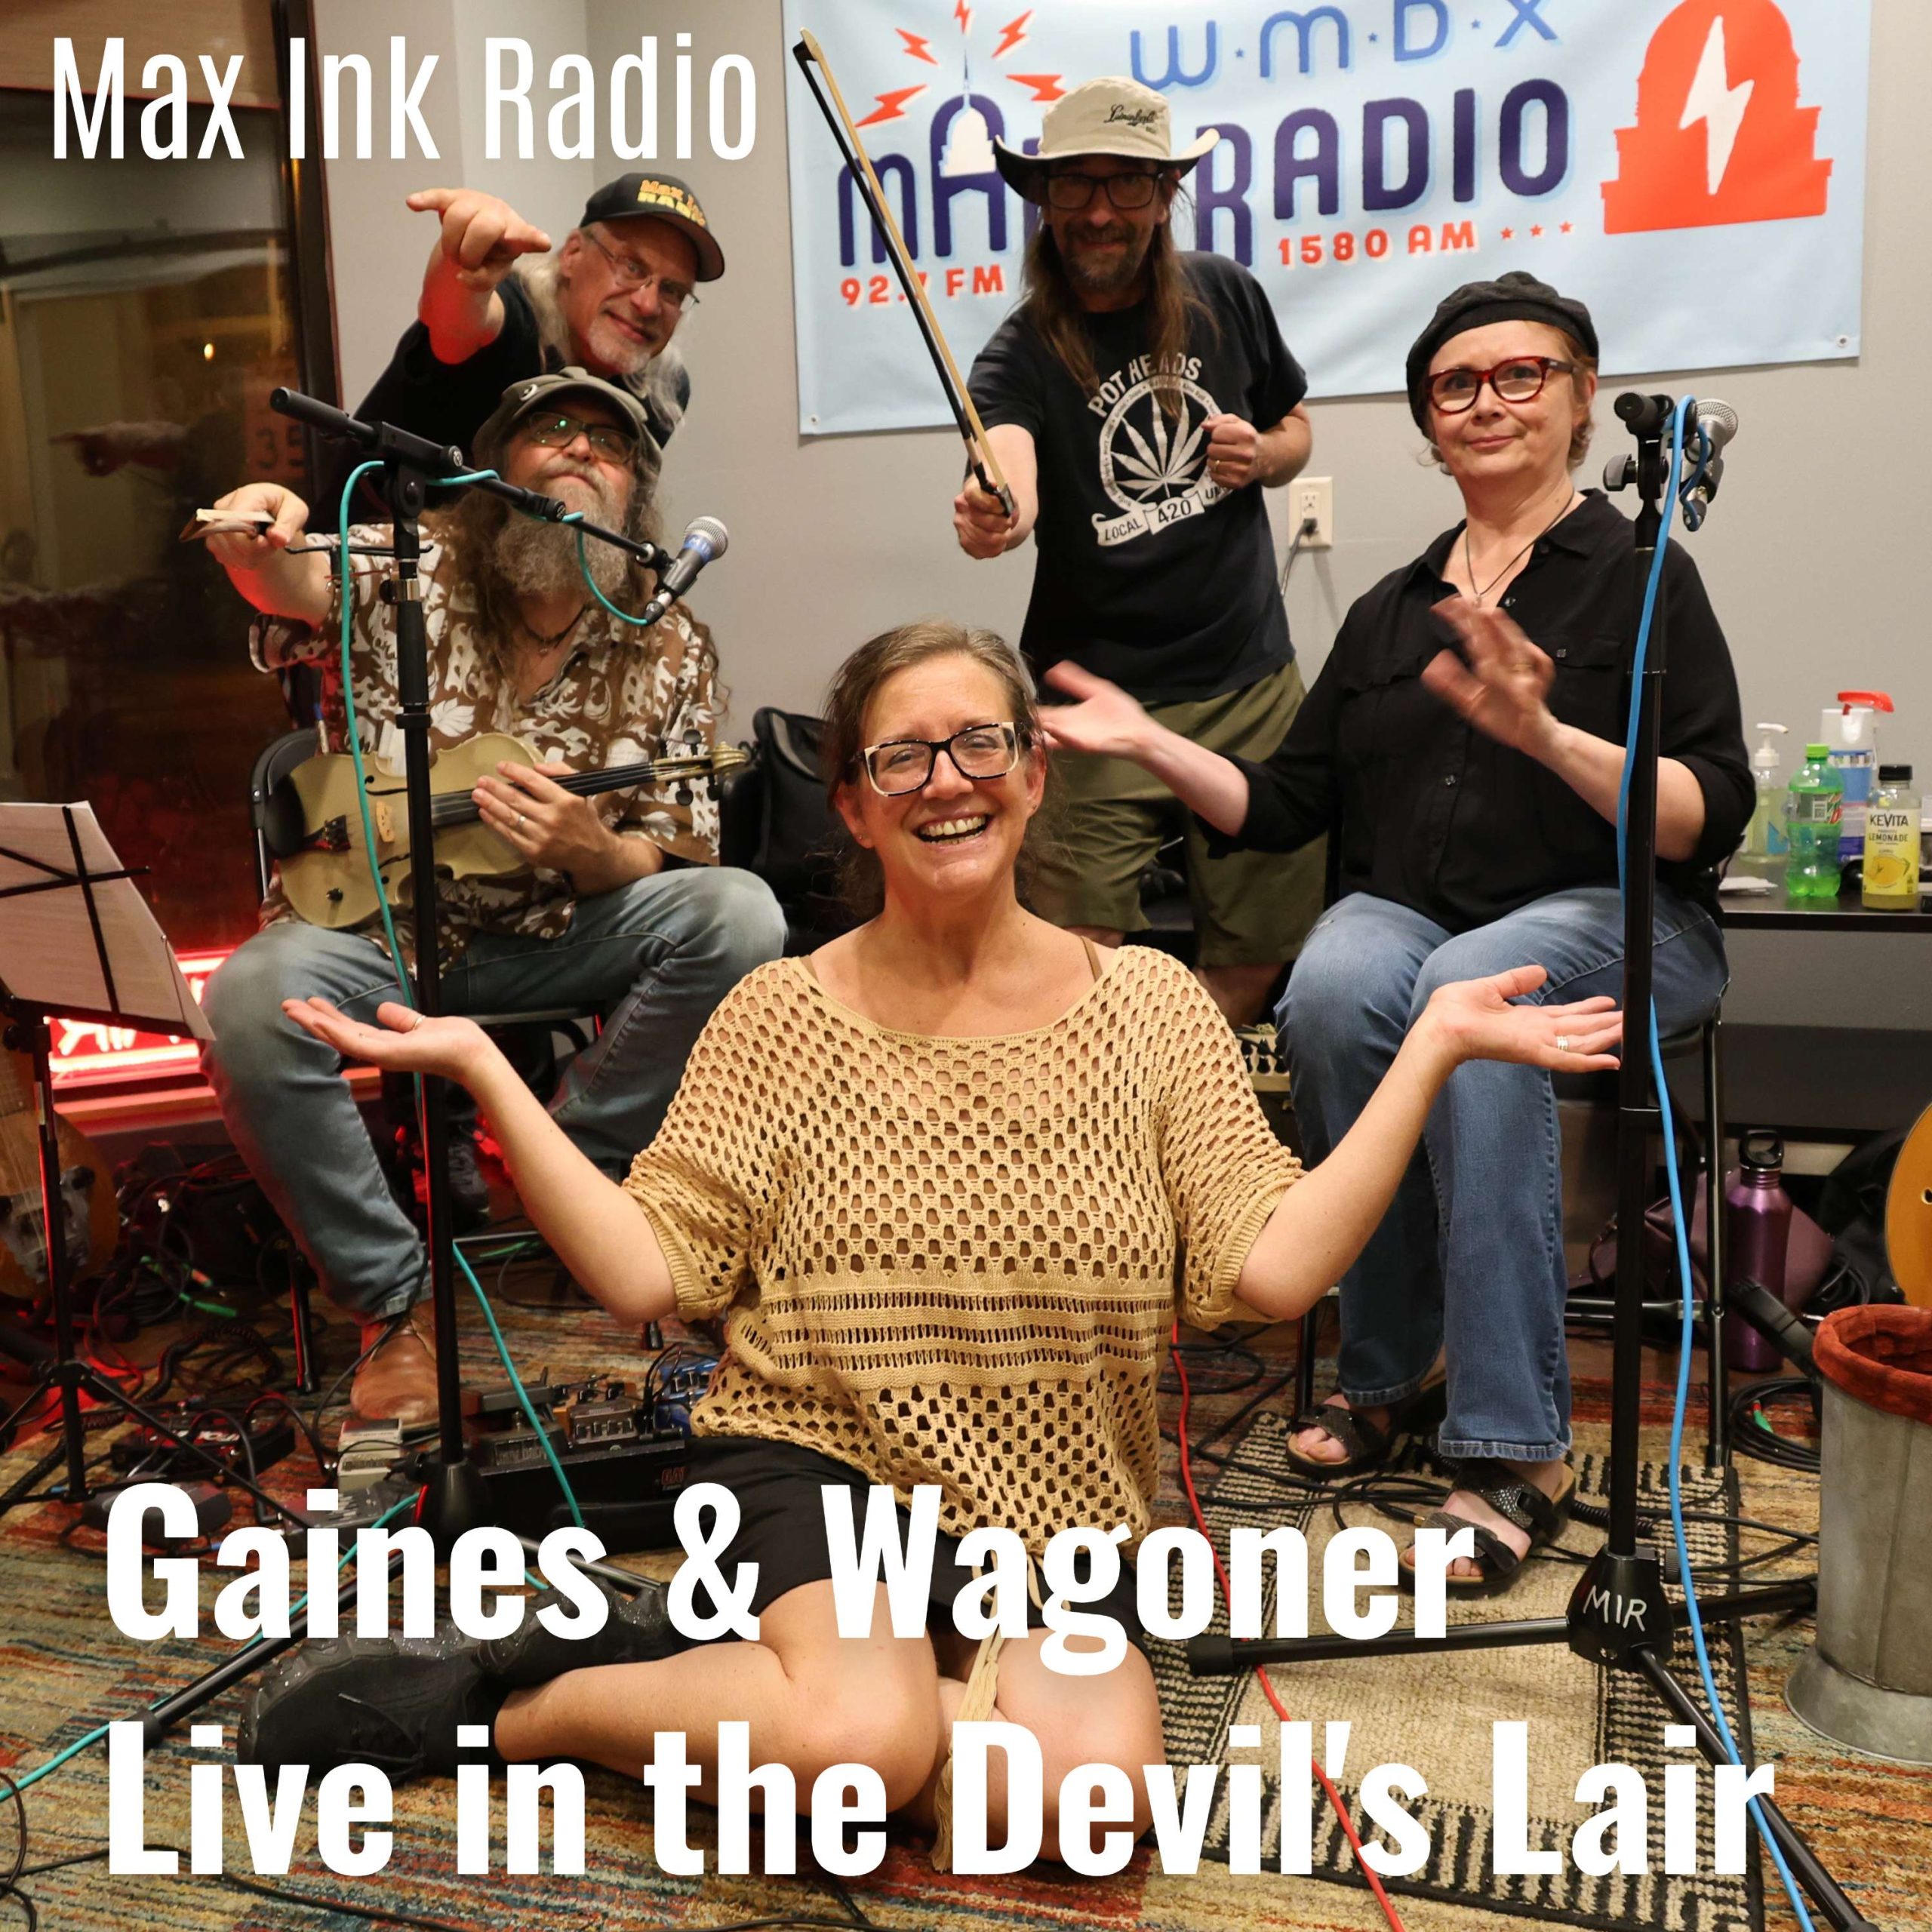 Gaines & Wagoner with Teri Barr, Rökker, and Jimmy K